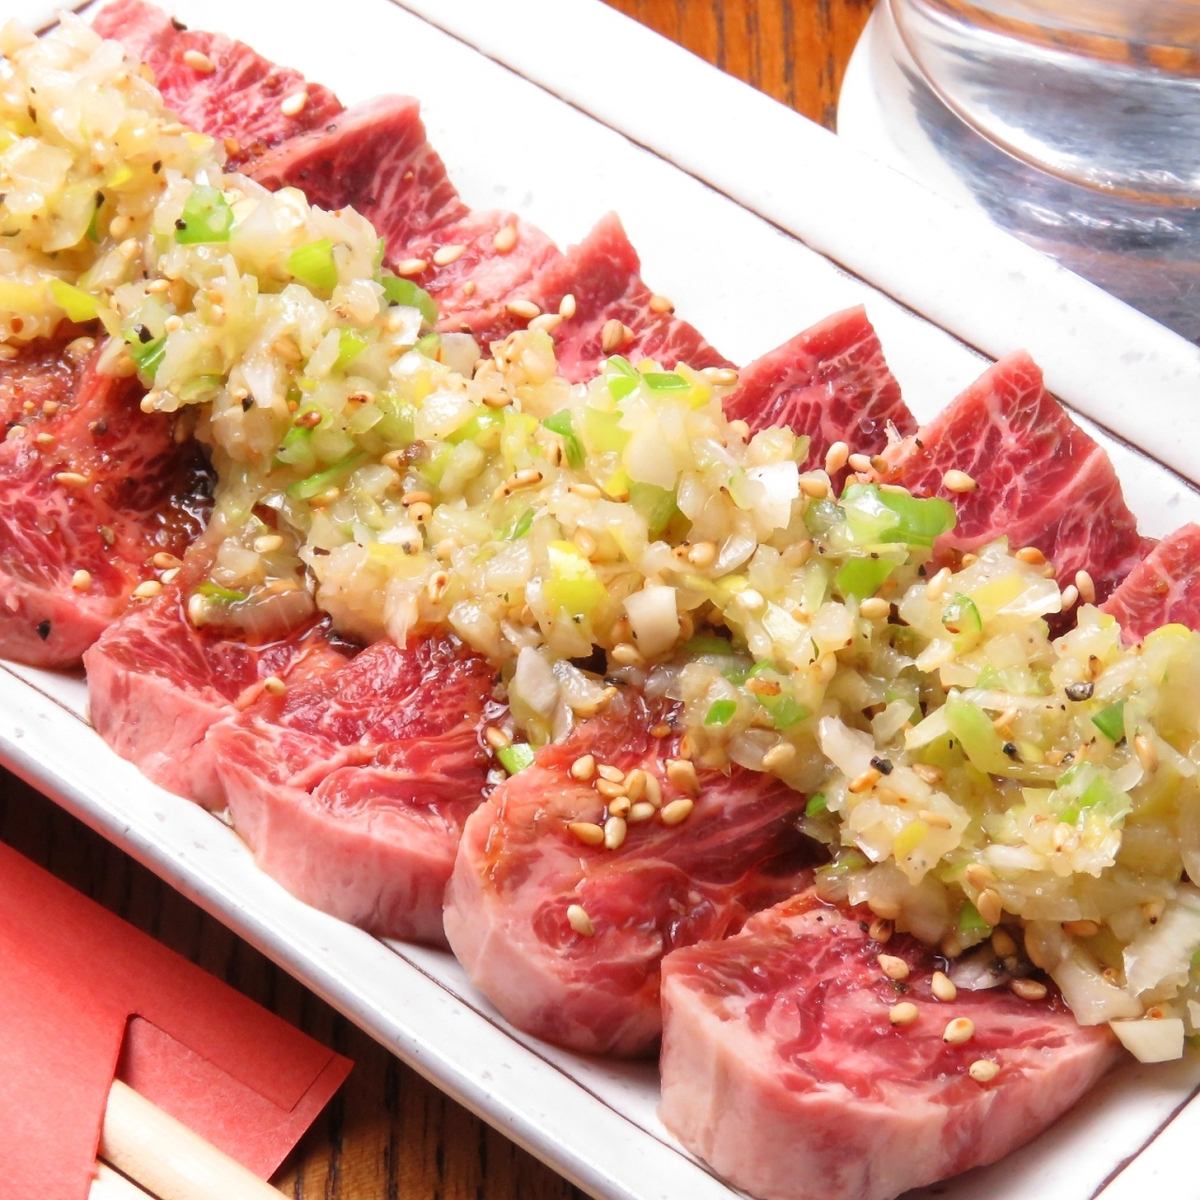 Enjoy the meat that you are particular about ♪ For various scenes such as after work and small banquets